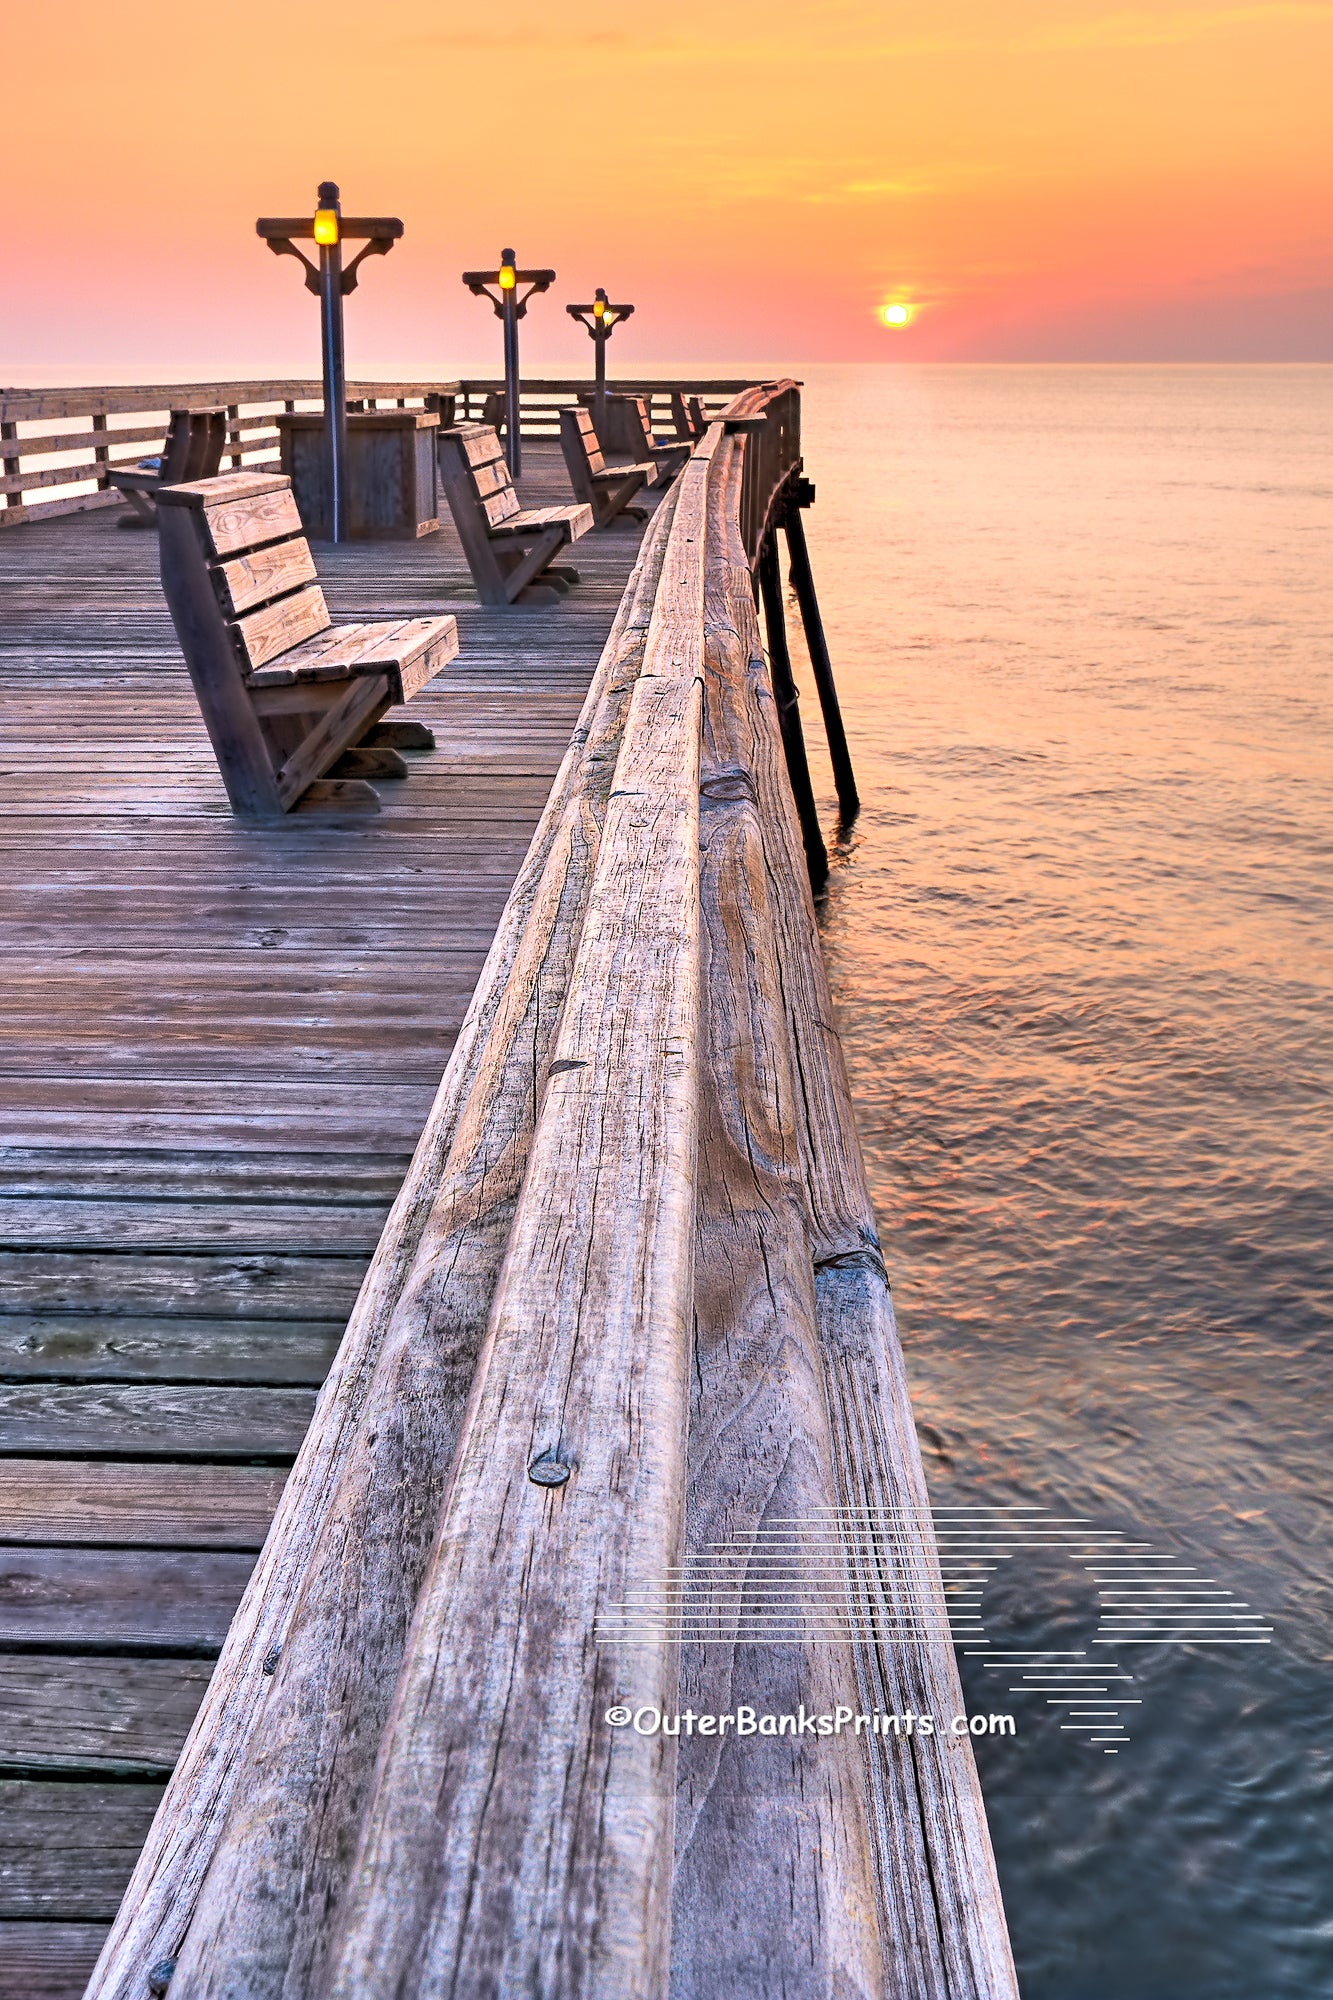 The railing of Kitty Hawk Fishing Pier leads to the sun breaking the horizon.